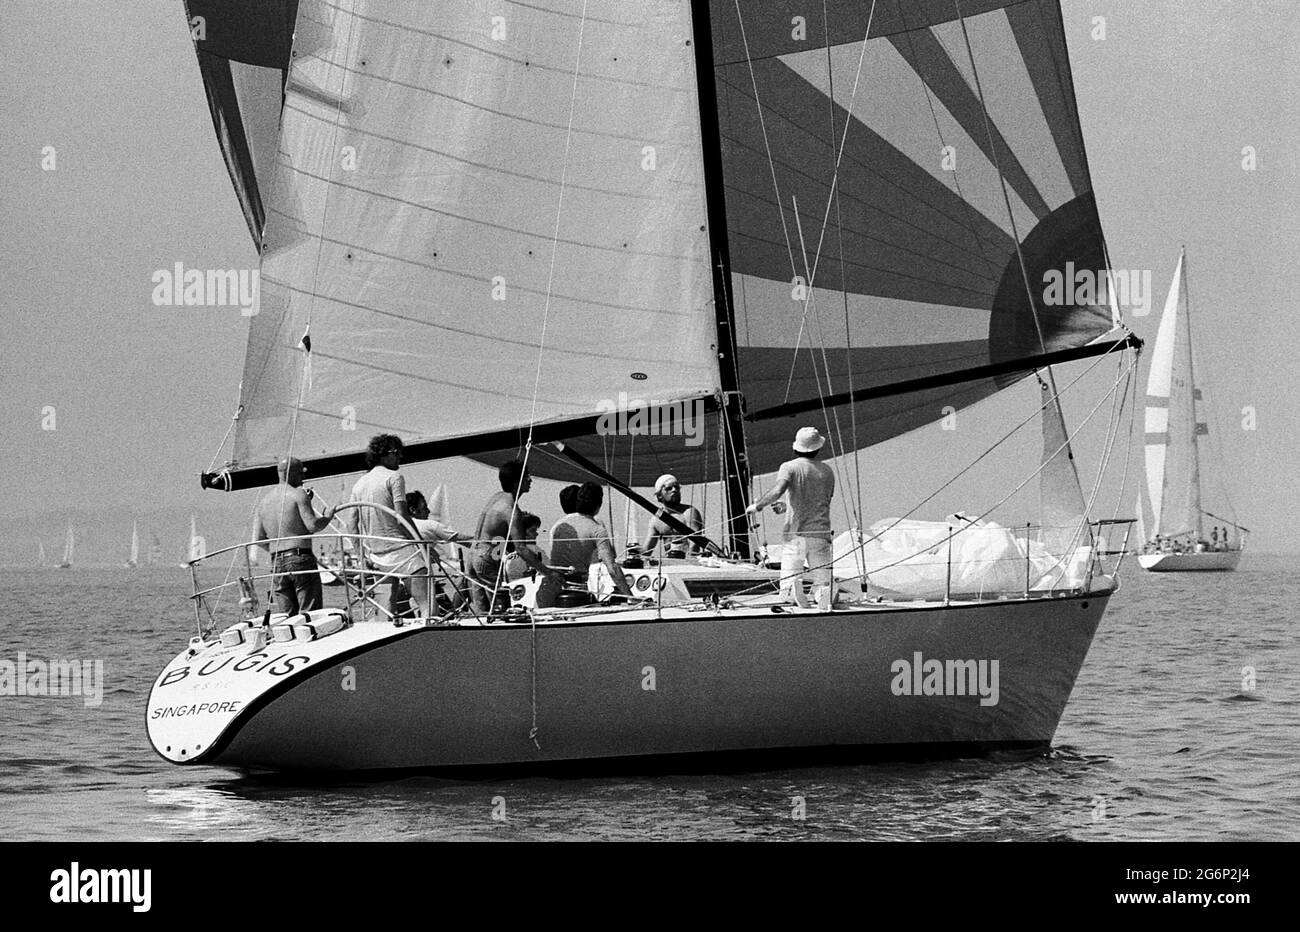 AJAXNETPHOTO. 7TH JULY, 1979. SOLENT, COWES, ENGLAND. - SINGAPORE CUP YACHT - BUGIS AT THE START OF THE COWES-DINARD OFFSHORE RACE.  PHOTO:JONATHAN EASTLAND/AJAX REF:2790707 35 23 Stock Photo